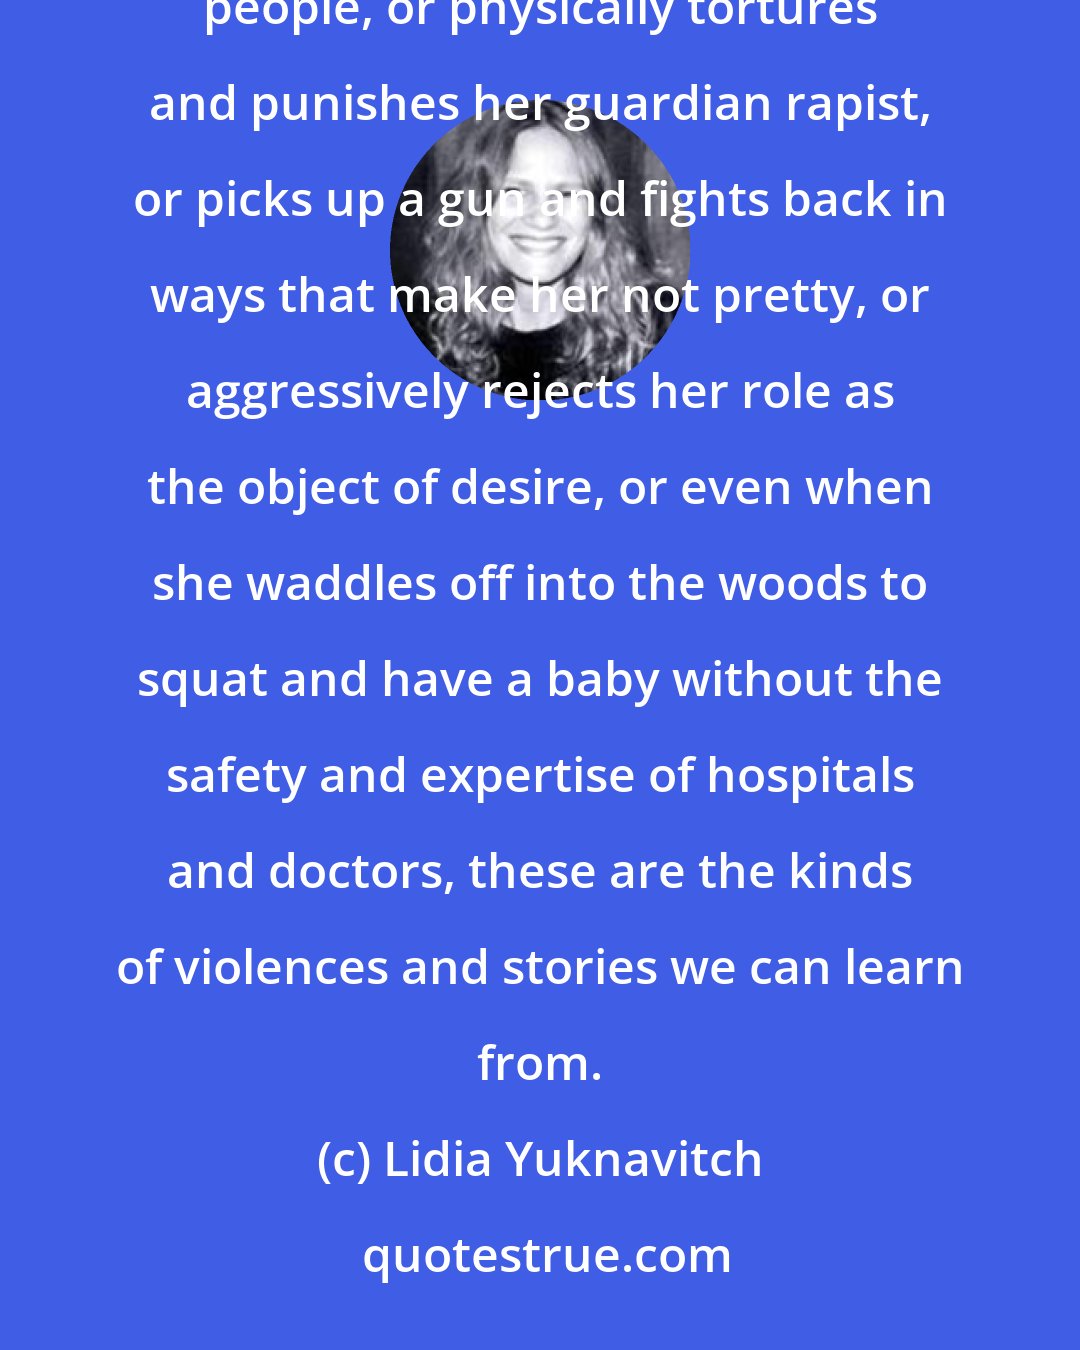 Lidia Yuknavitch: When a female character sets herself on fire in an effort to interrupt her culture's violent abuse of disenfranchised people, or physically tortures and punishes her guardian rapist, or picks up a gun and fights back in ways that make her not pretty, or aggressively rejects her role as the object of desire, or even when she waddles off into the woods to squat and have a baby without the safety and expertise of hospitals and doctors, these are the kinds of violences and stories we can learn from.